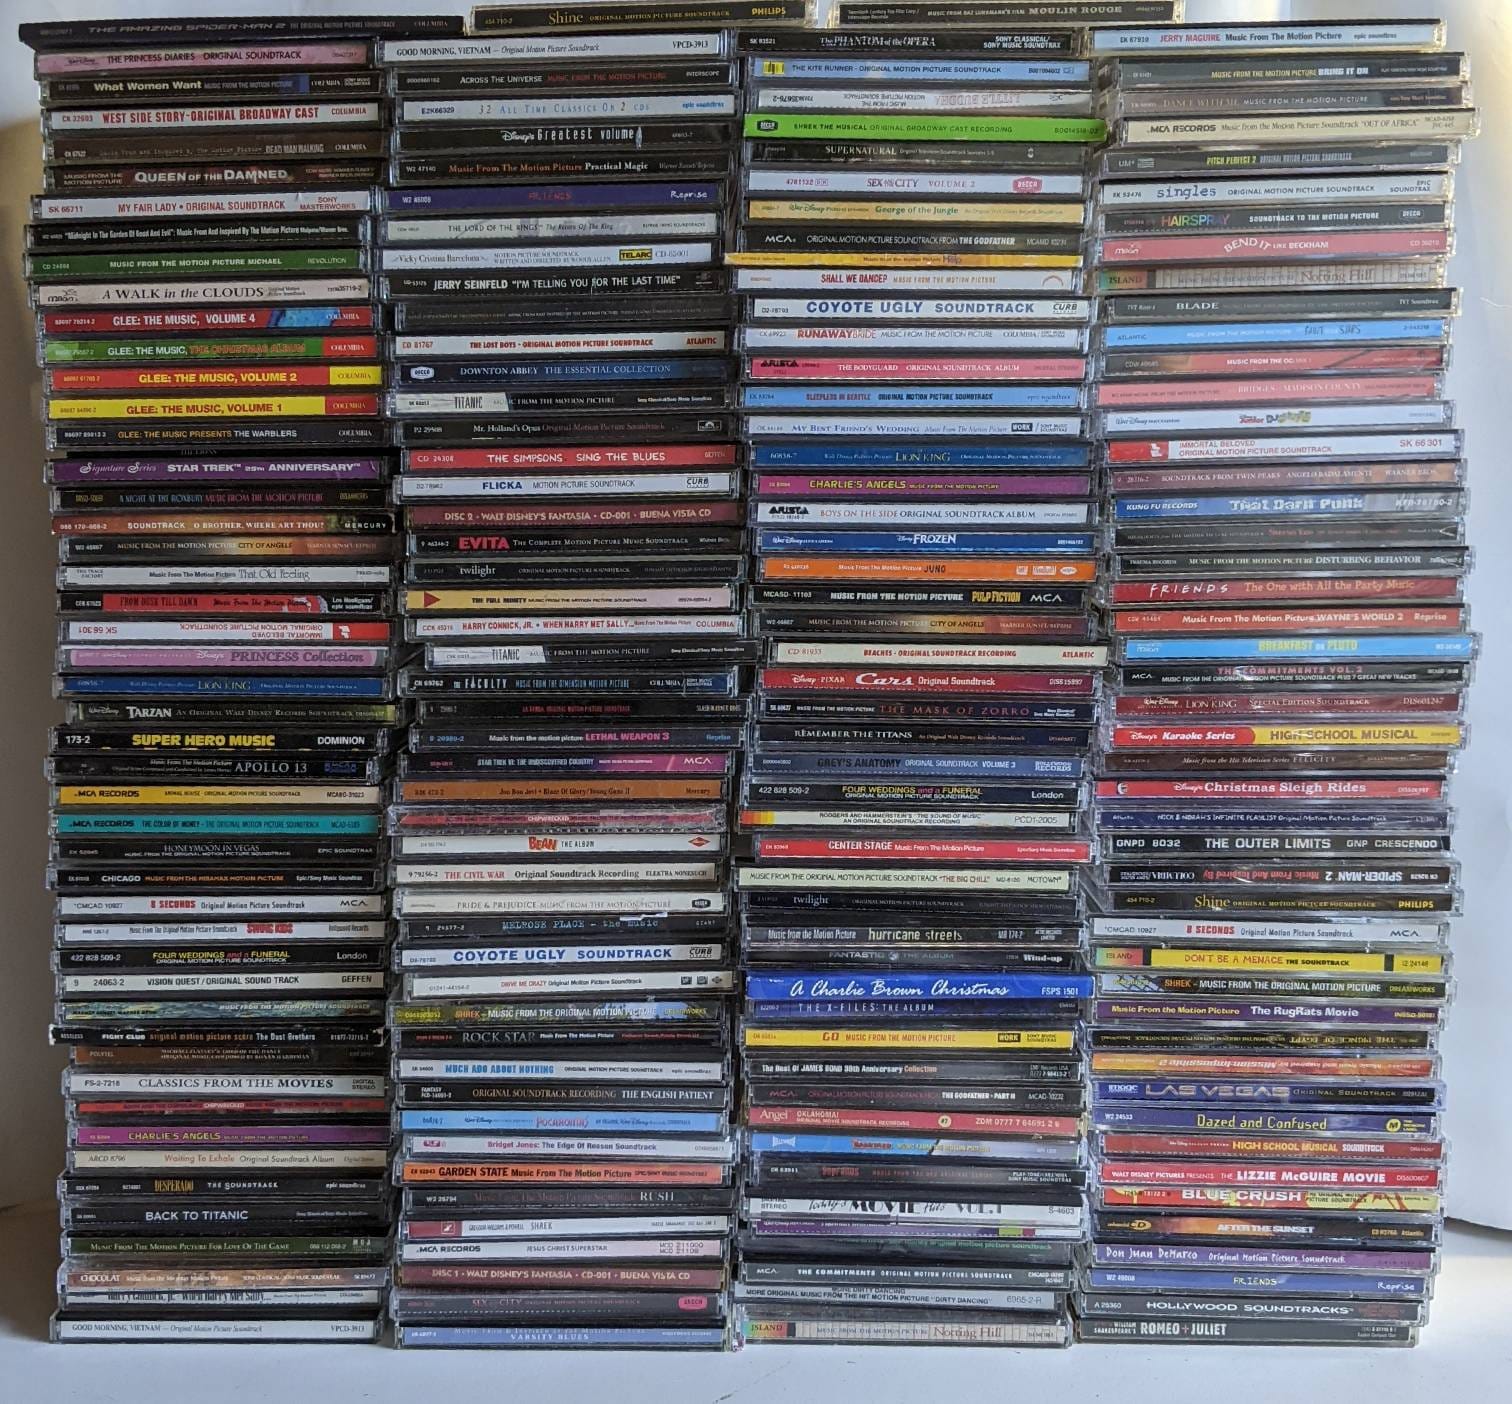 Mystery Lot of Cds: 20 Assorted Music Cd's, 24.99 Including Shipping to Any  US Address 